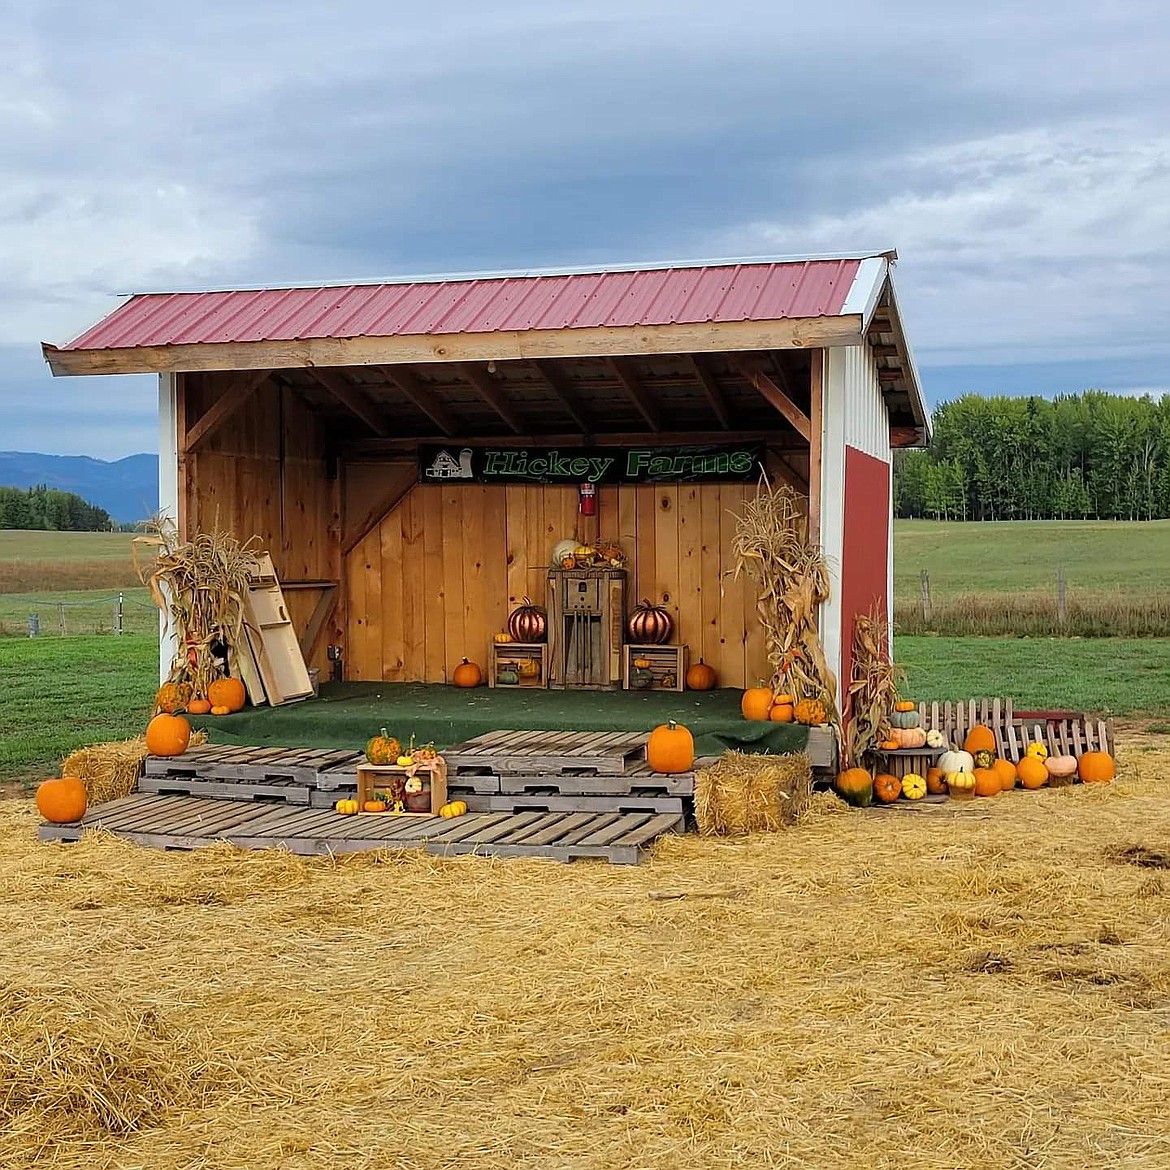 On Oct. 17, Star the Magician will be performing on this stage at Hickey Farms in Sandpoint at 1 p.m. Courtesy photo